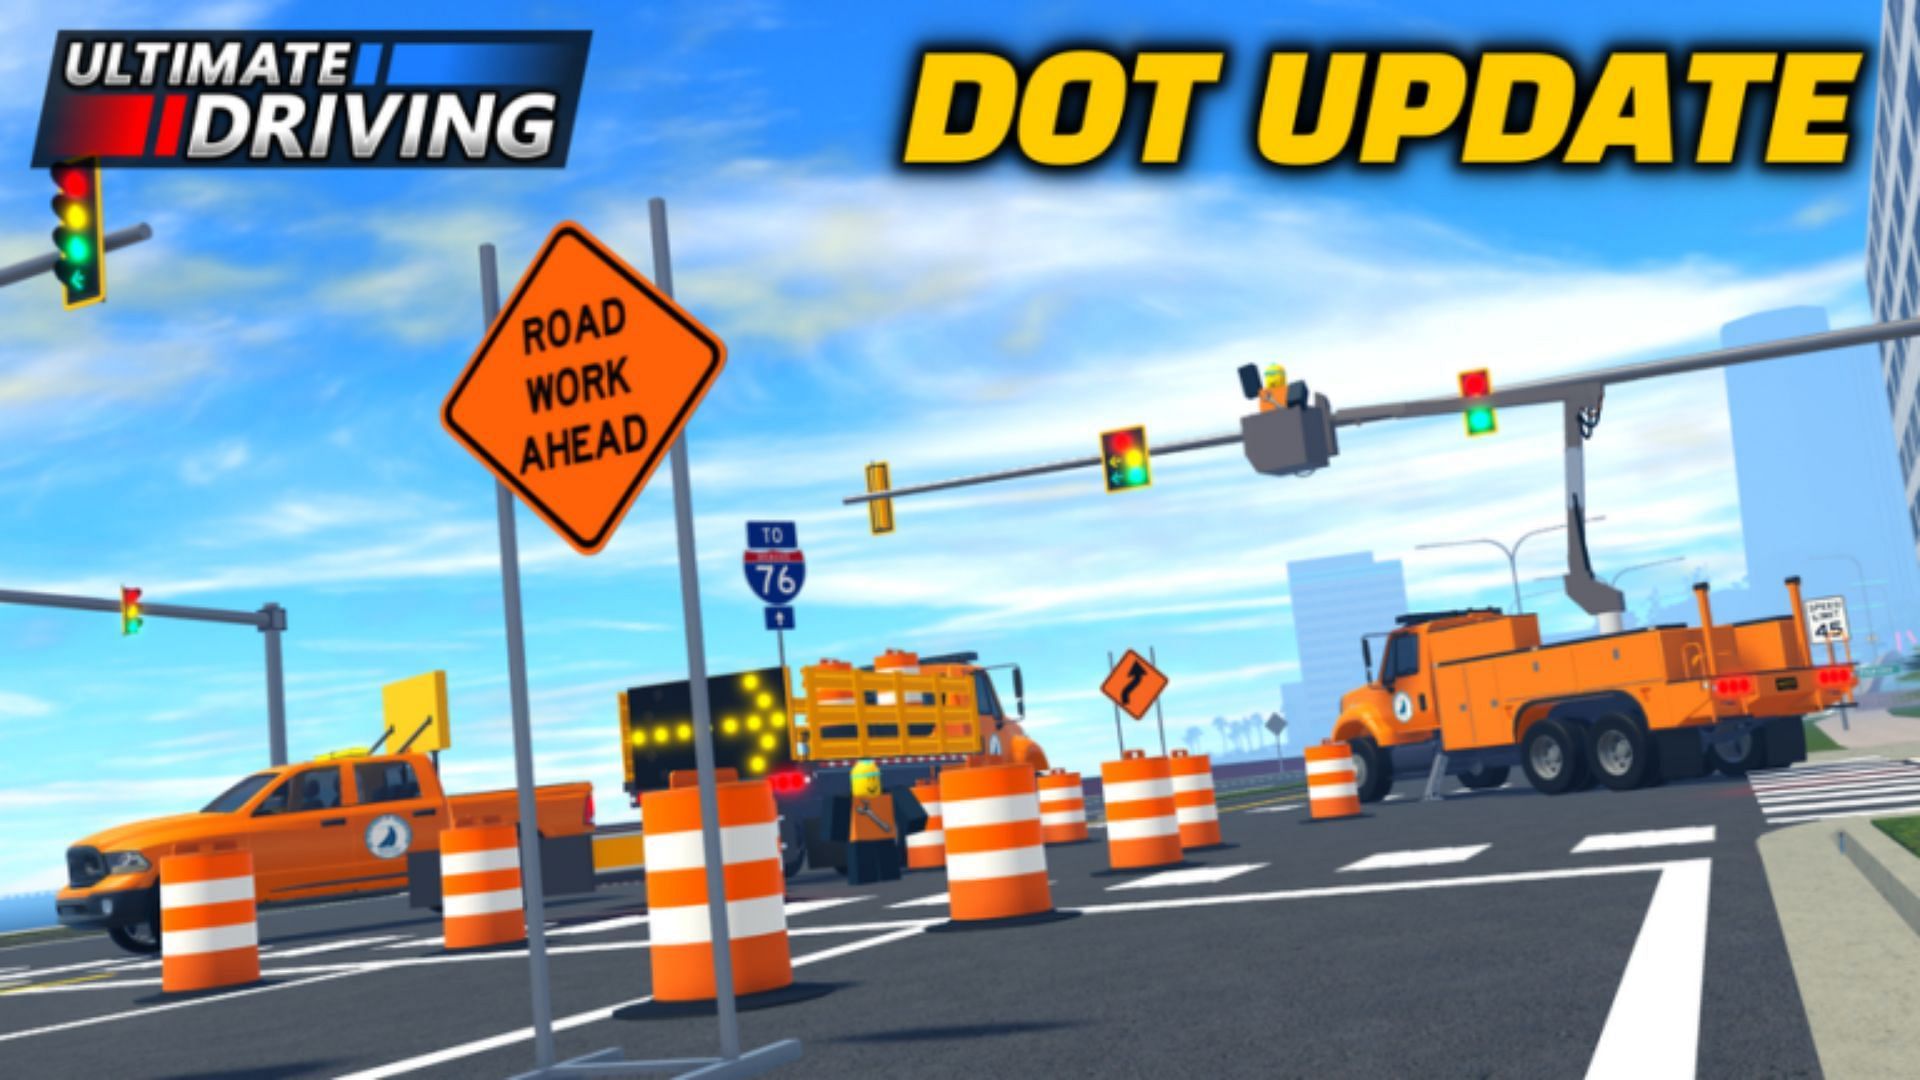 Codes for Ultimate Driving and their importance (Image via Roblox)